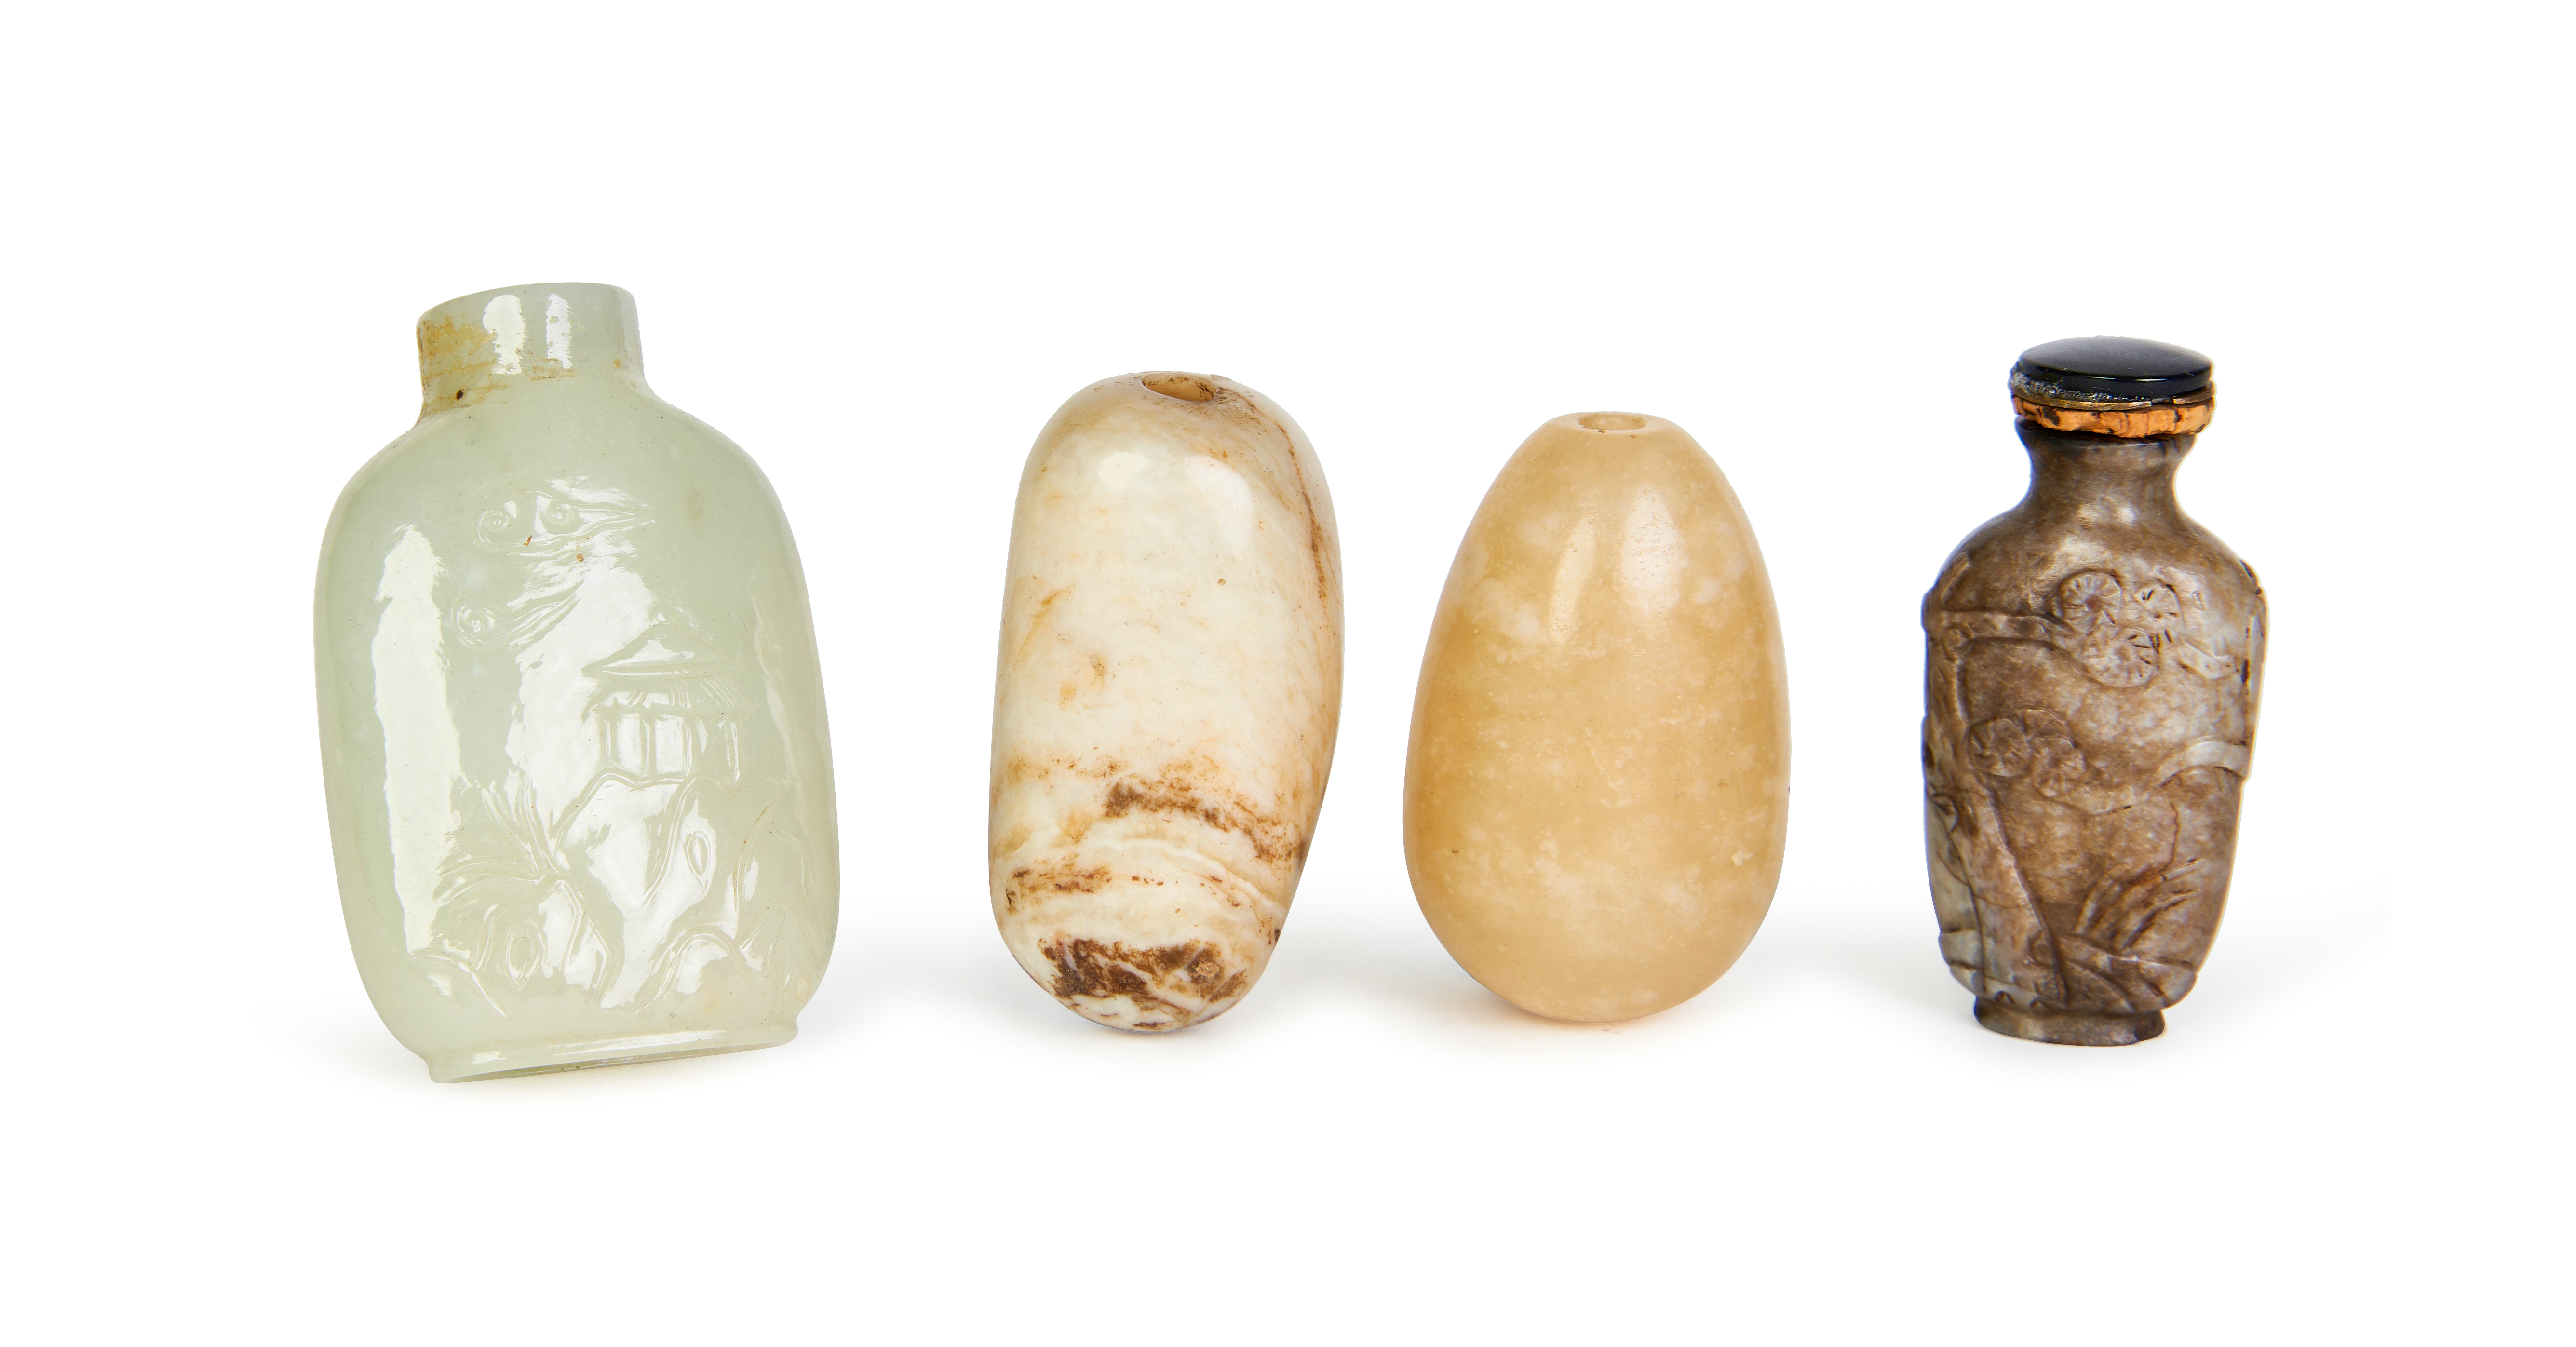 FOUR CHINESE CARVED JADE SNUFF BOTTLES, QING DYNASTY (1644-1911) - Image 2 of 3